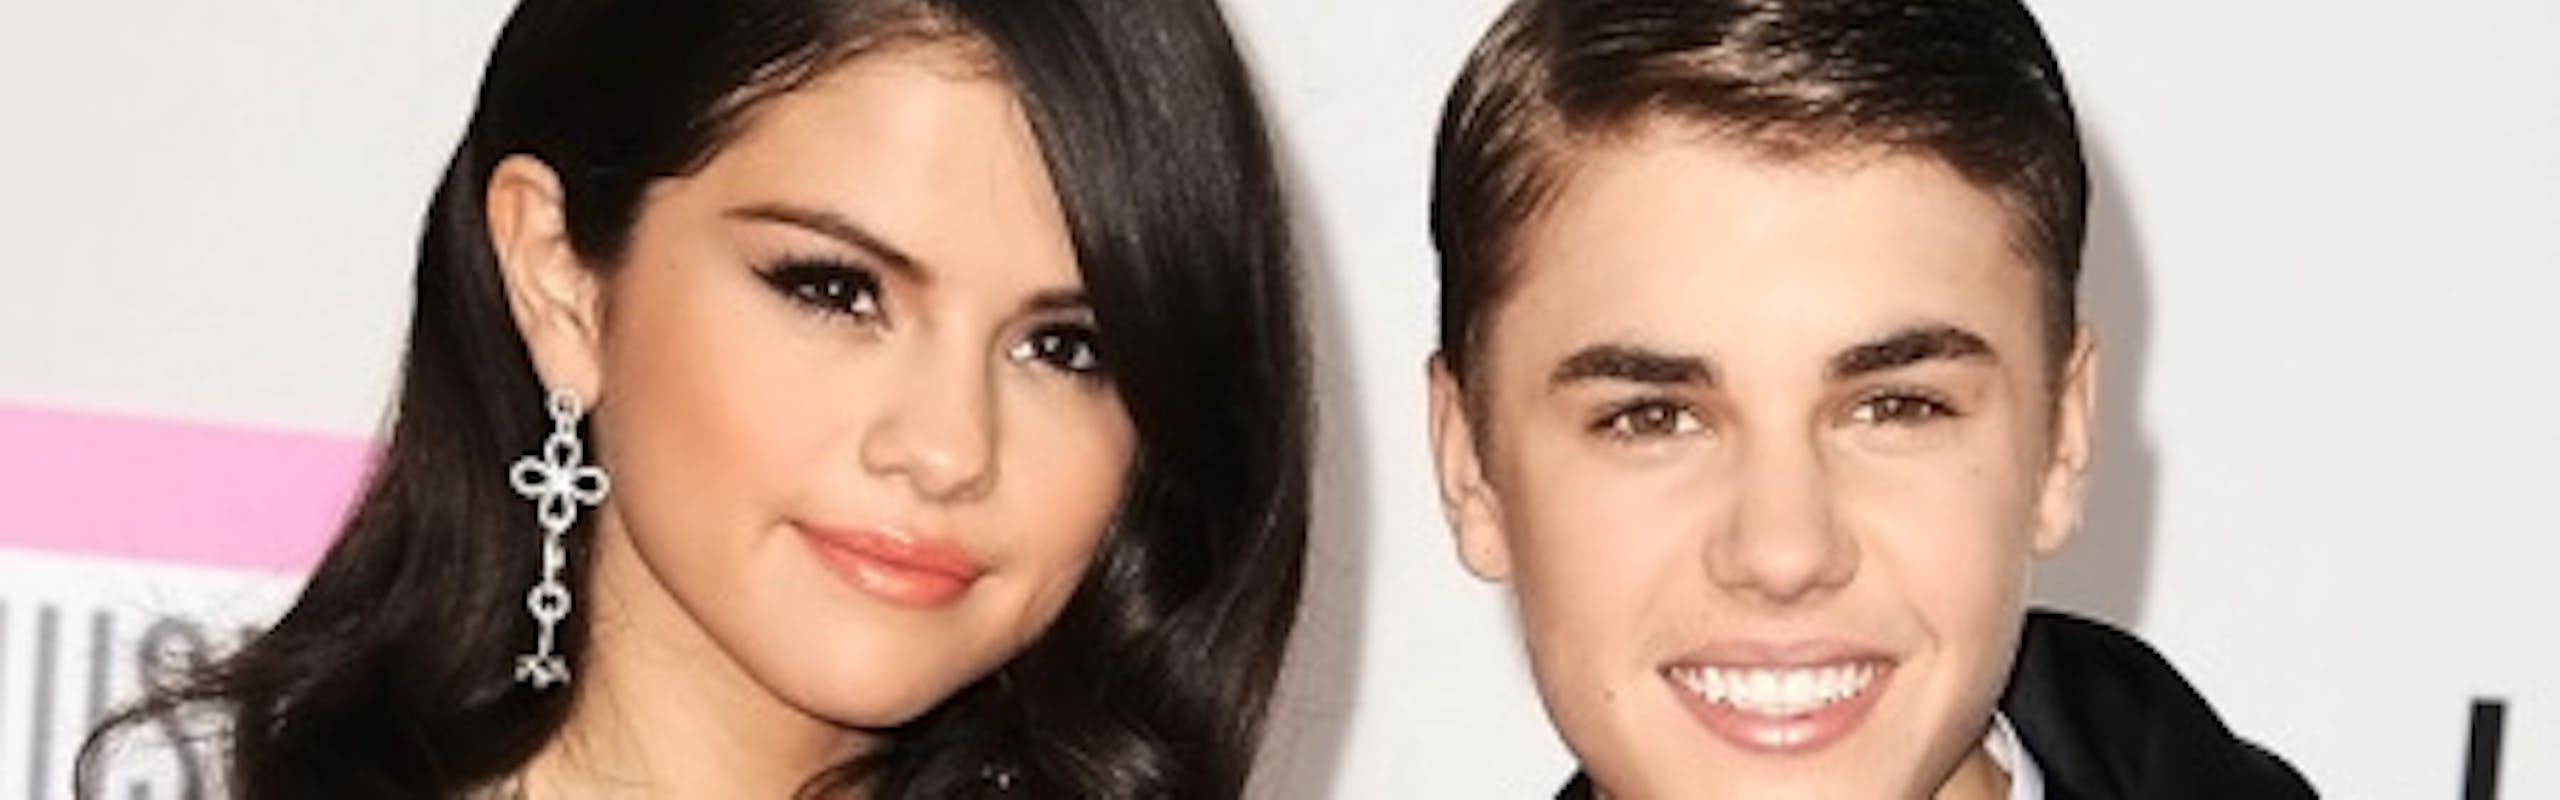 Selena Gomez and Justin Bieber on a red carpet.